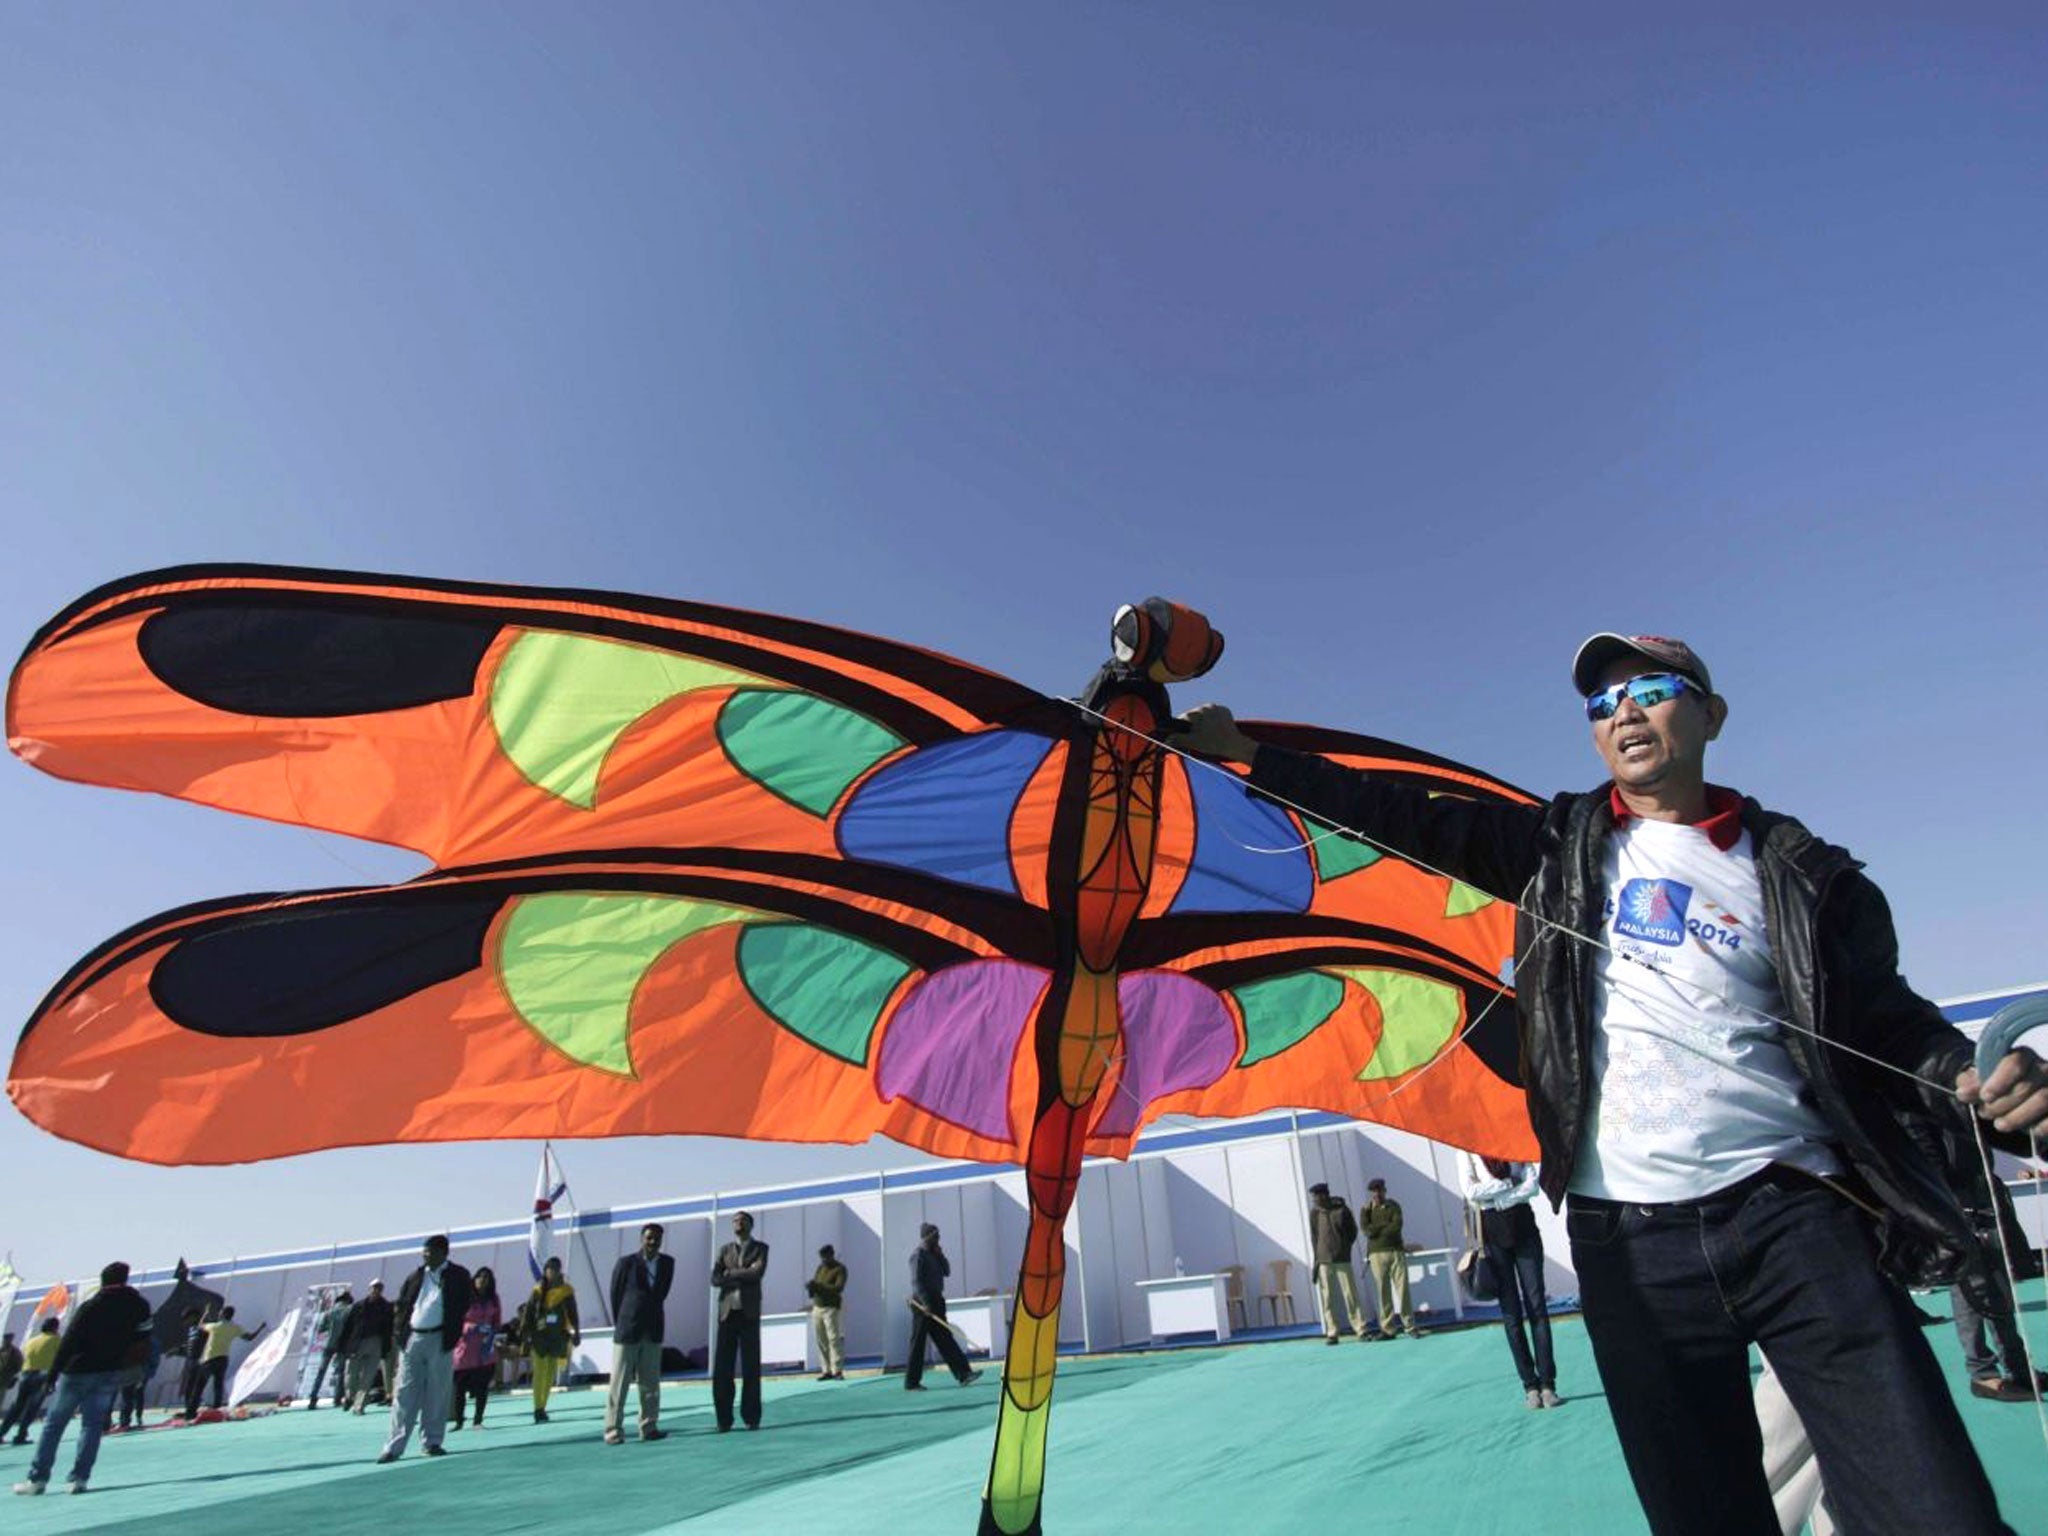 A man from Malaysia prepares to fly a kite during the International Kite Festival at white sand in the Rann of Kutch, a seasonal salt marsh located in the Thar Desert, in Dhordo, about 500 kilometers (311 miles) from Ahmadabad